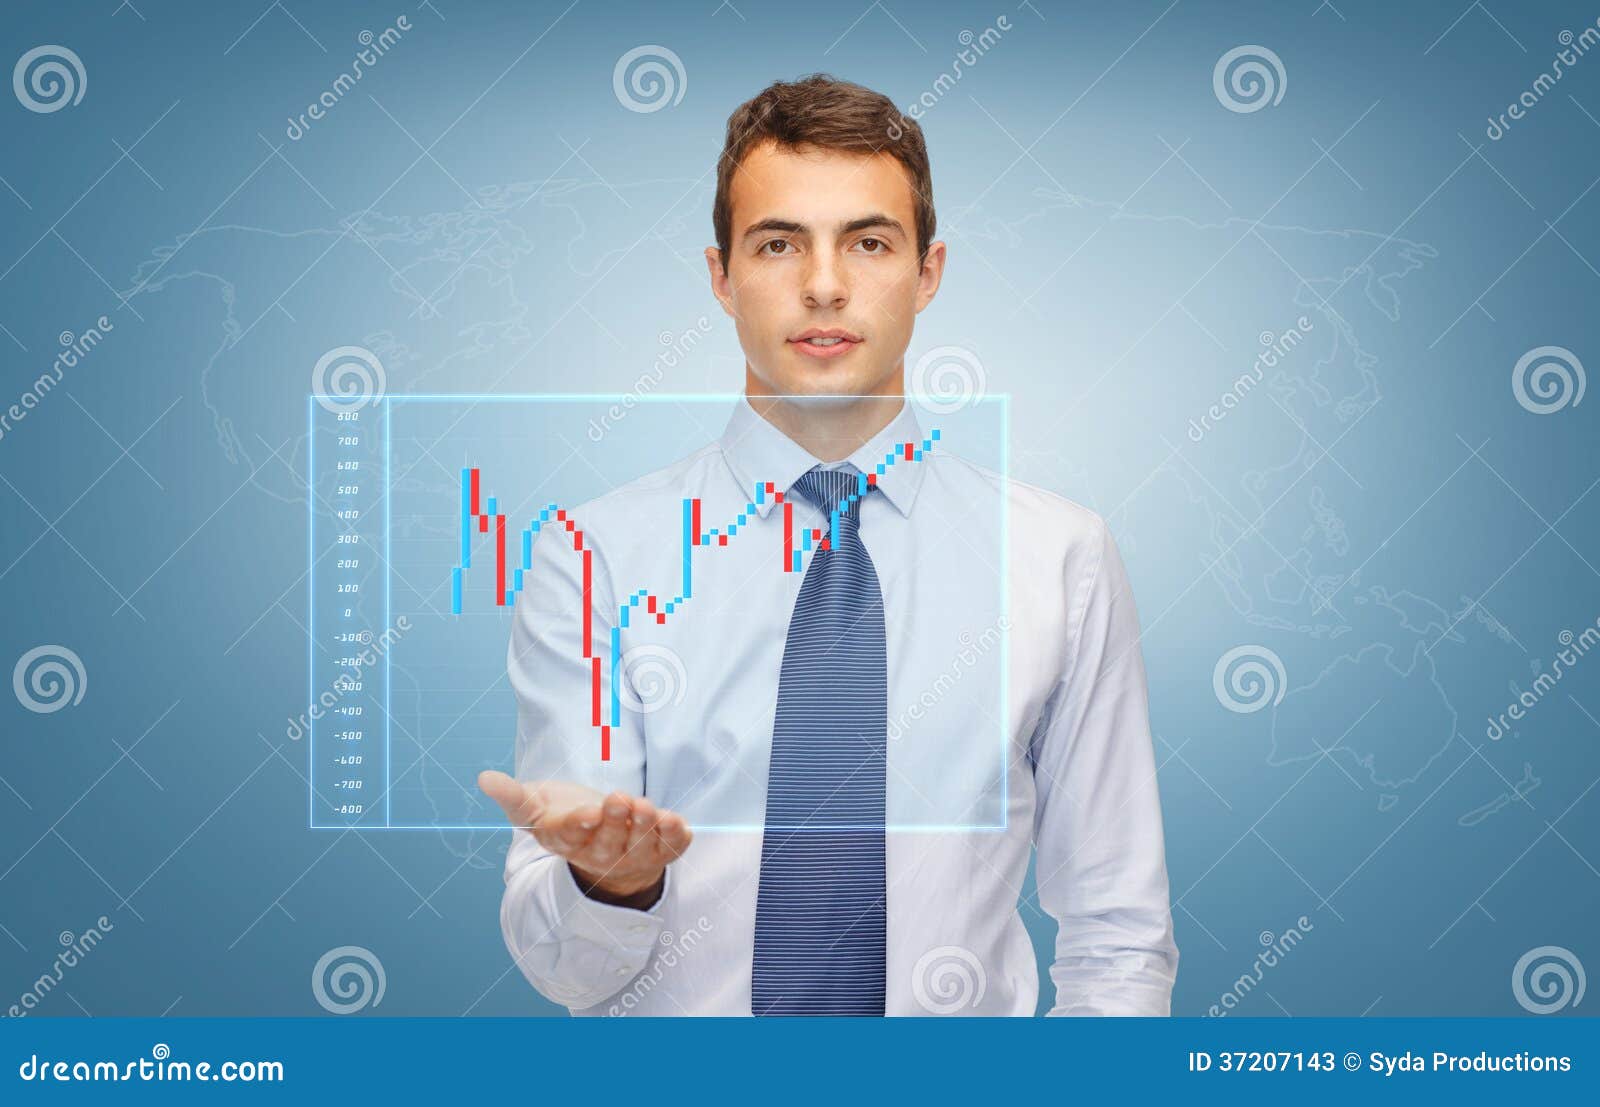 The forex guy